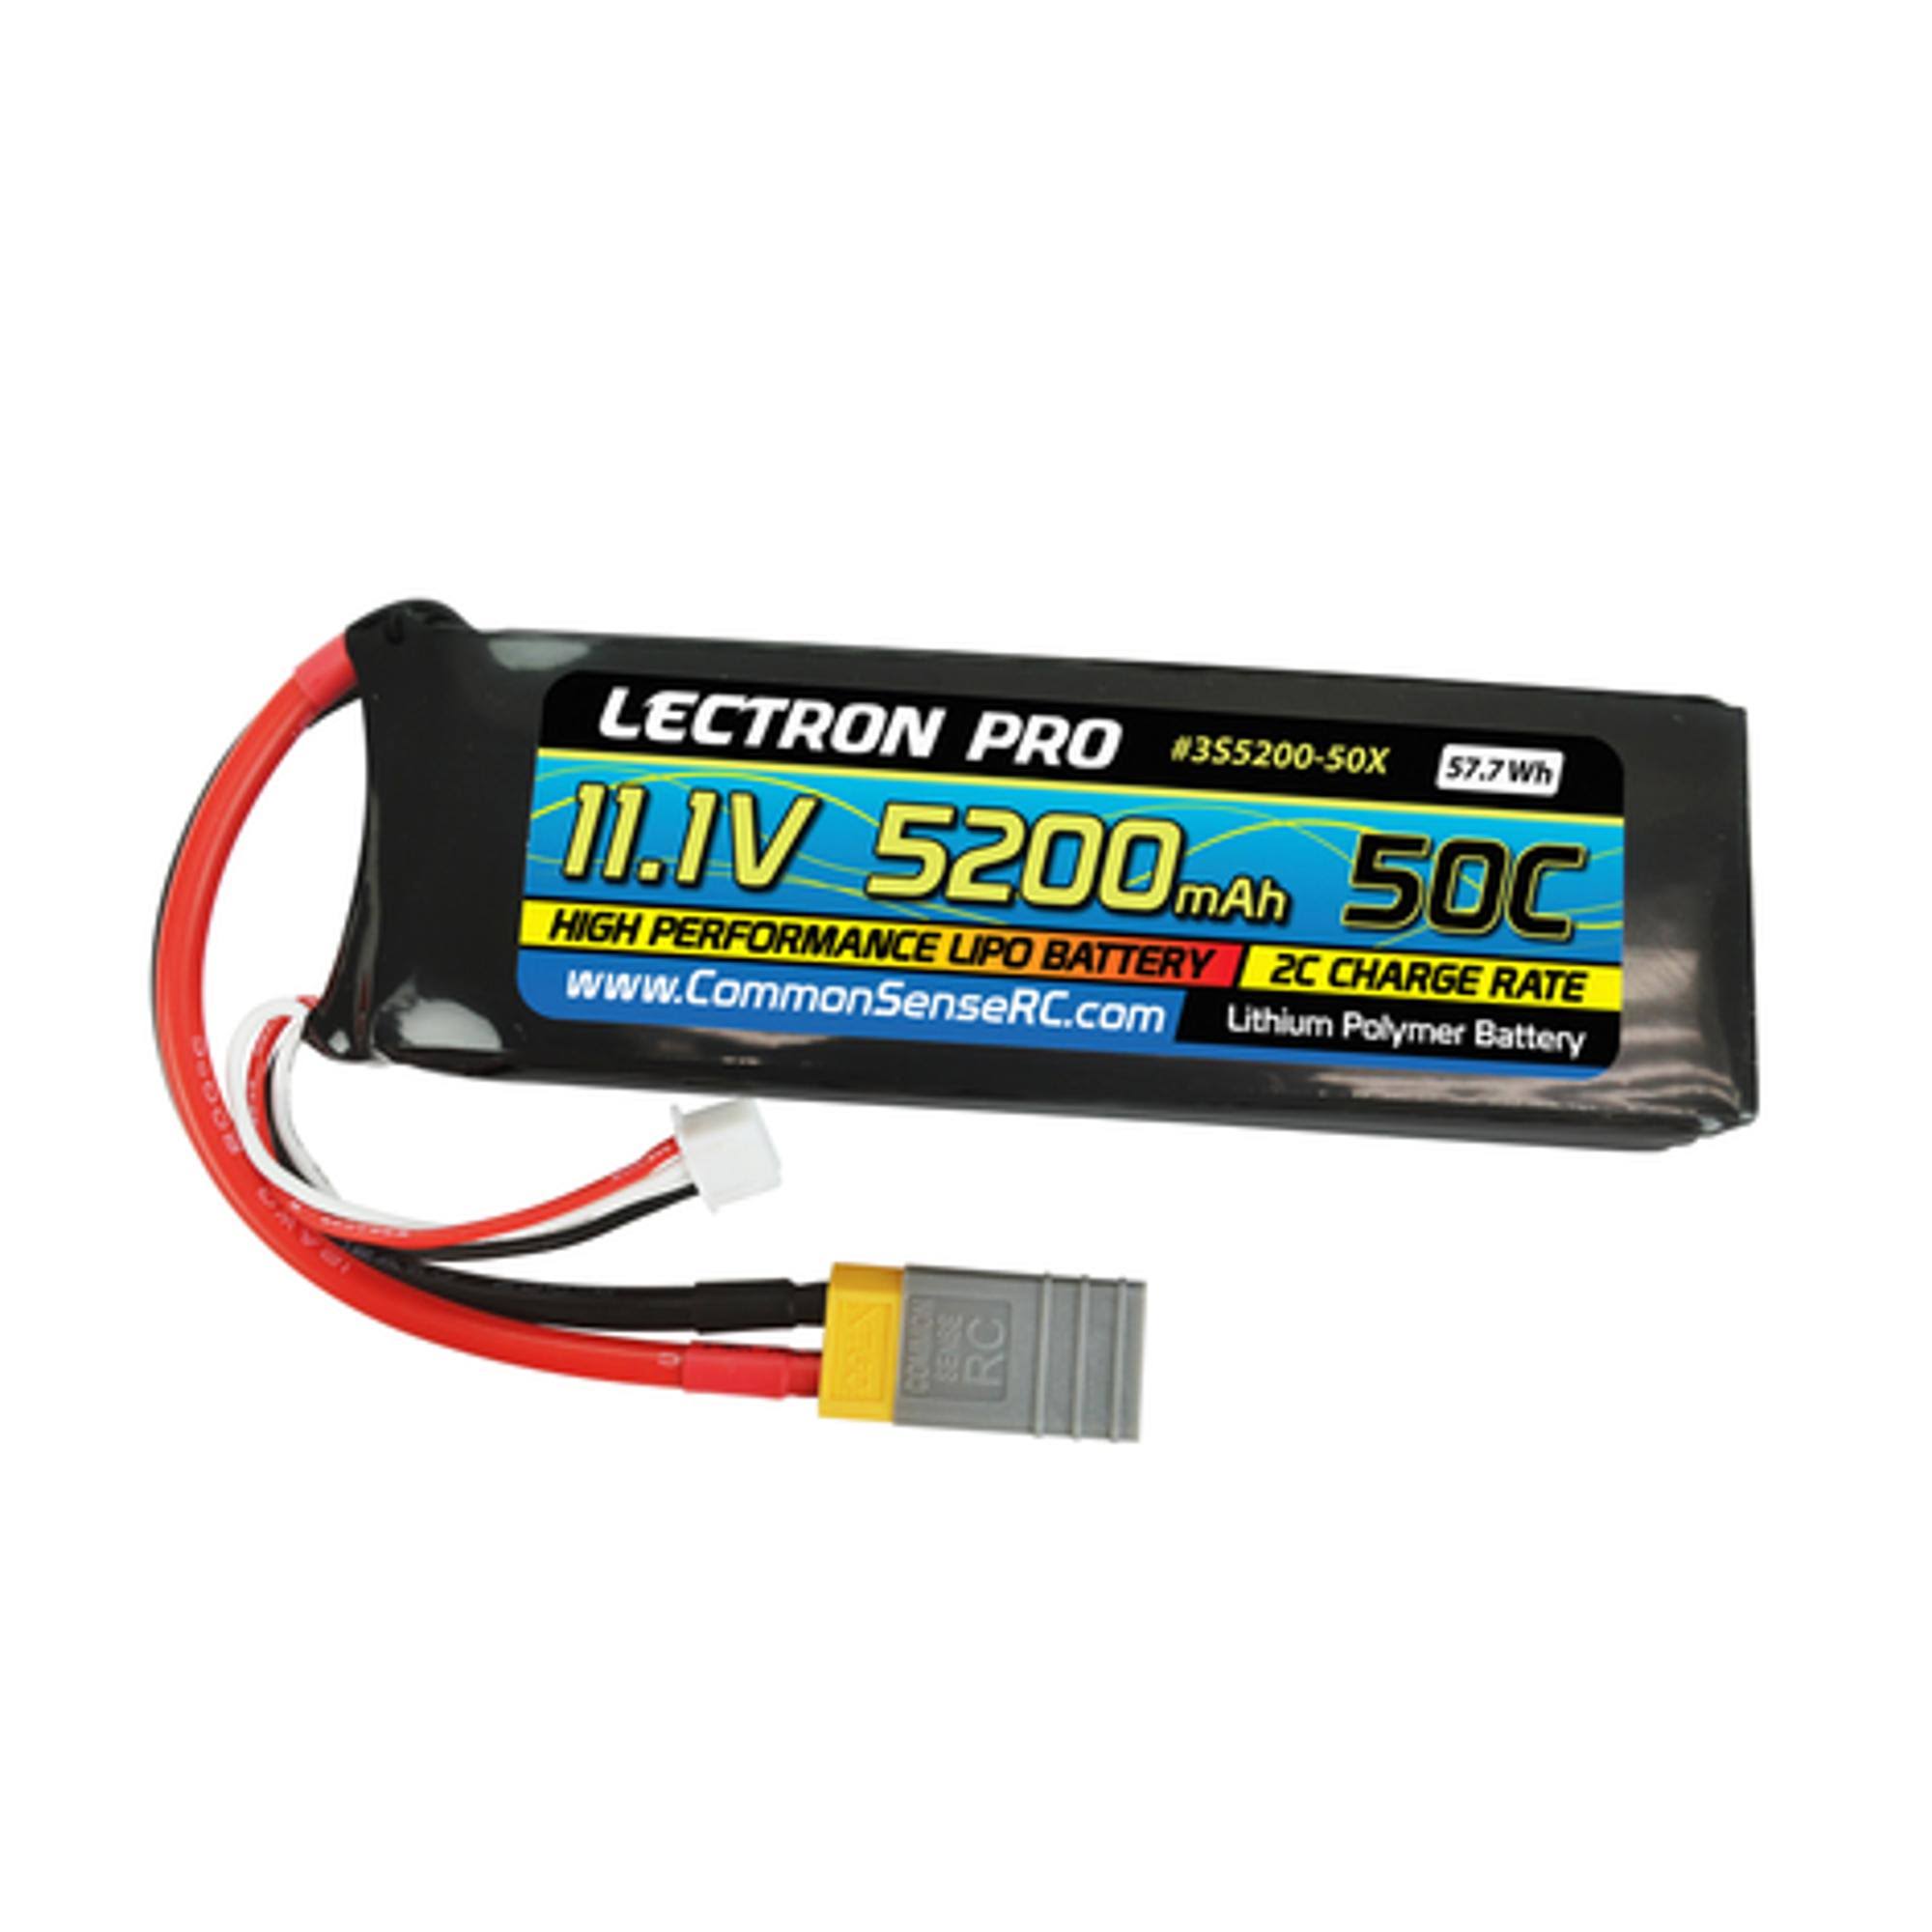 Lectron Pro 11.1V 5200mAh 50C Lipo Battery With XT60 Connector